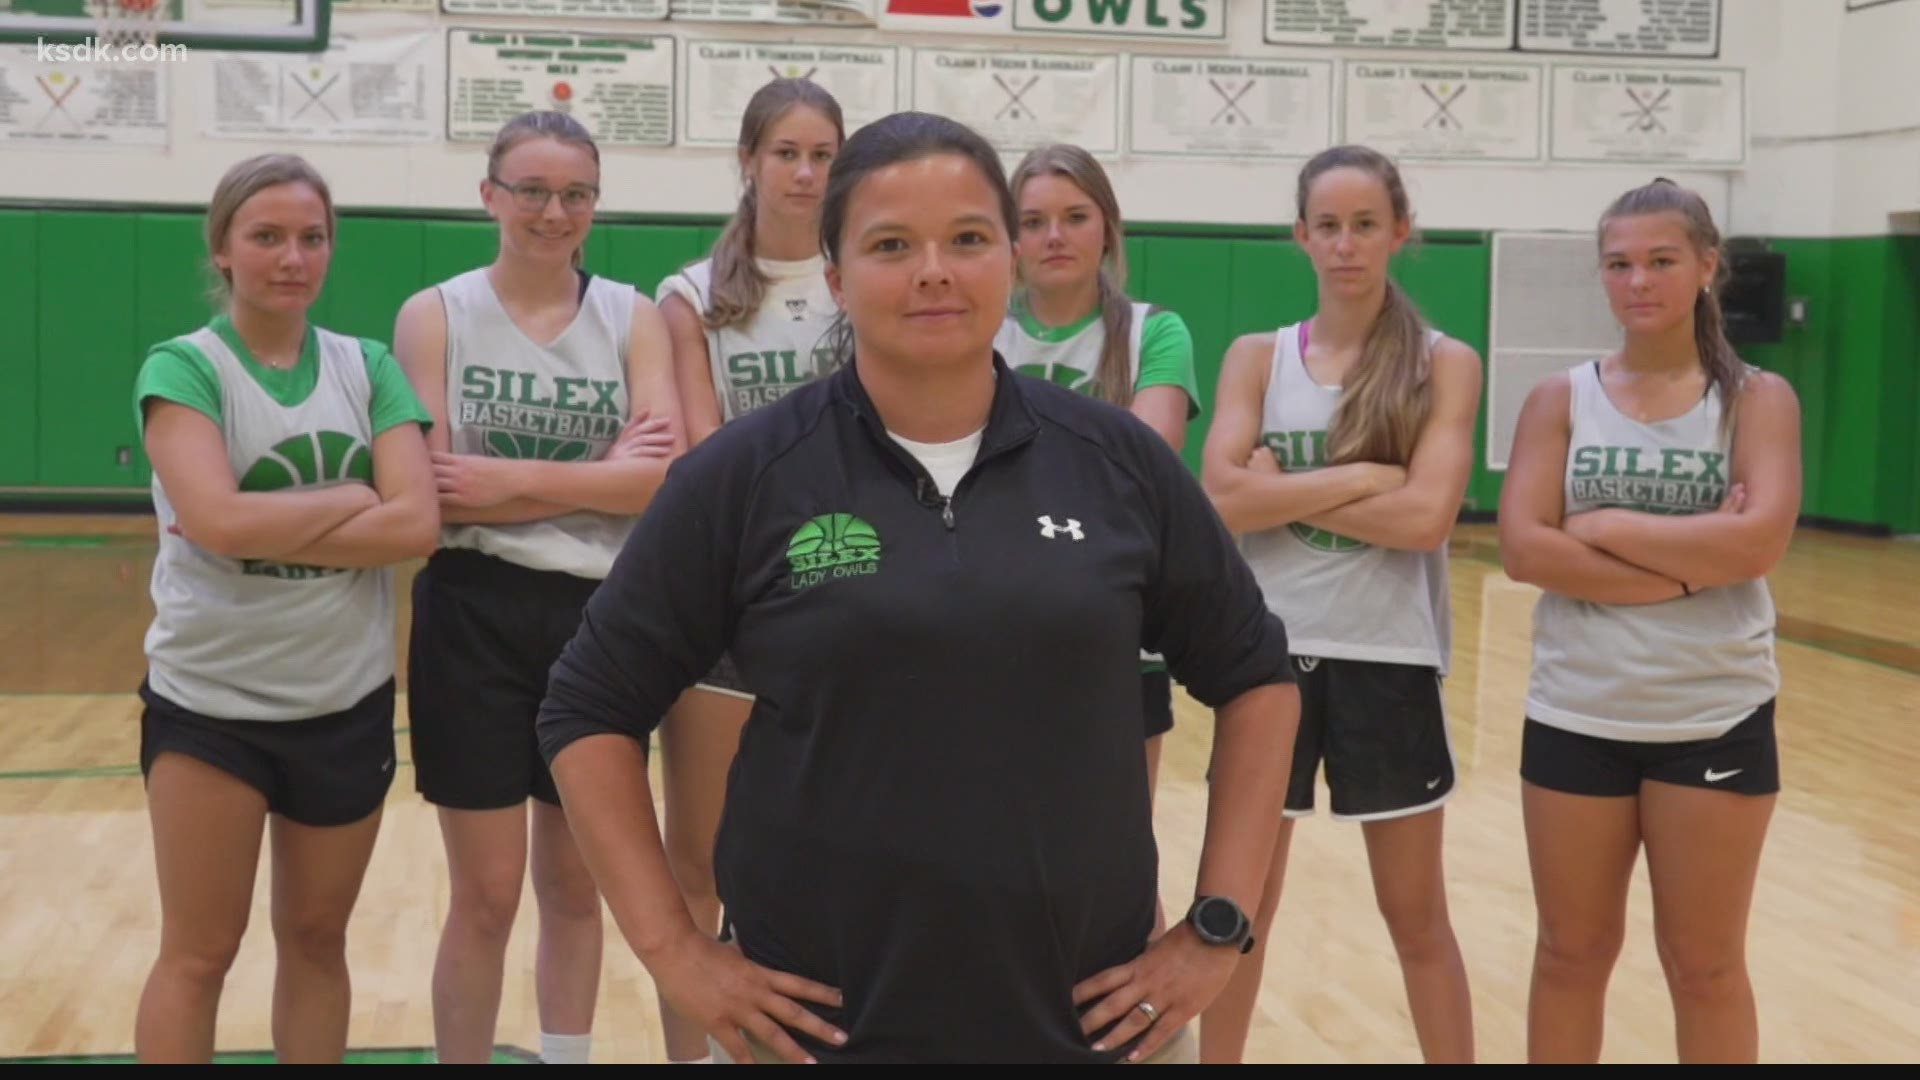 Coach in Silex, Missouri sets an example for basketball team